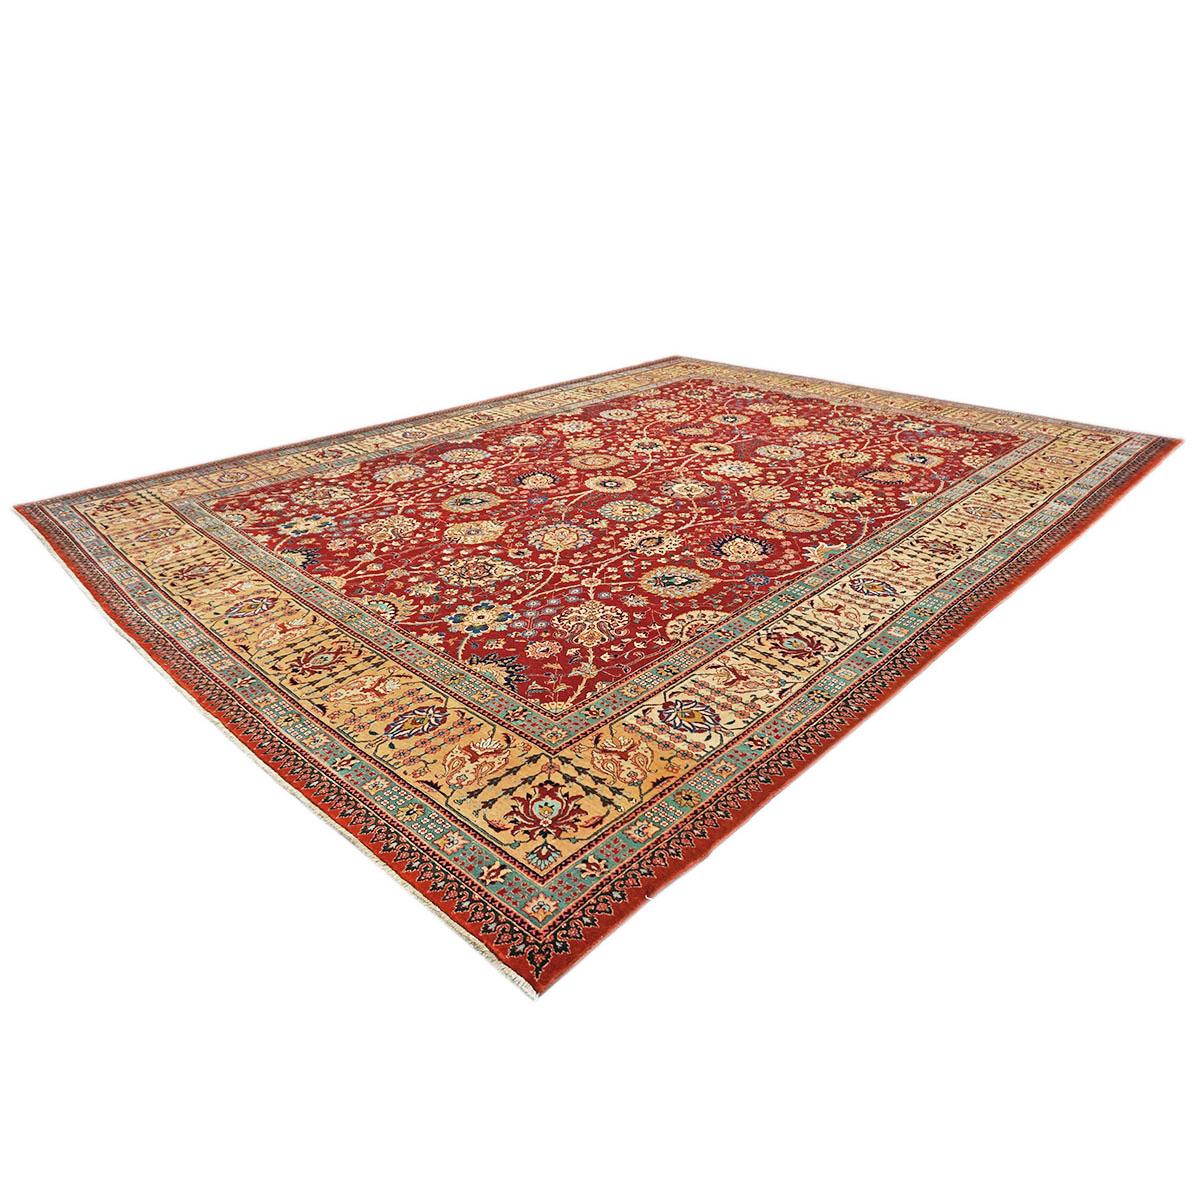 20th Century Antique Persian Tabriz Pahlavi 10x13 Red & Gold Handmade Area Rug In Good Condition For Sale In Houston, TX